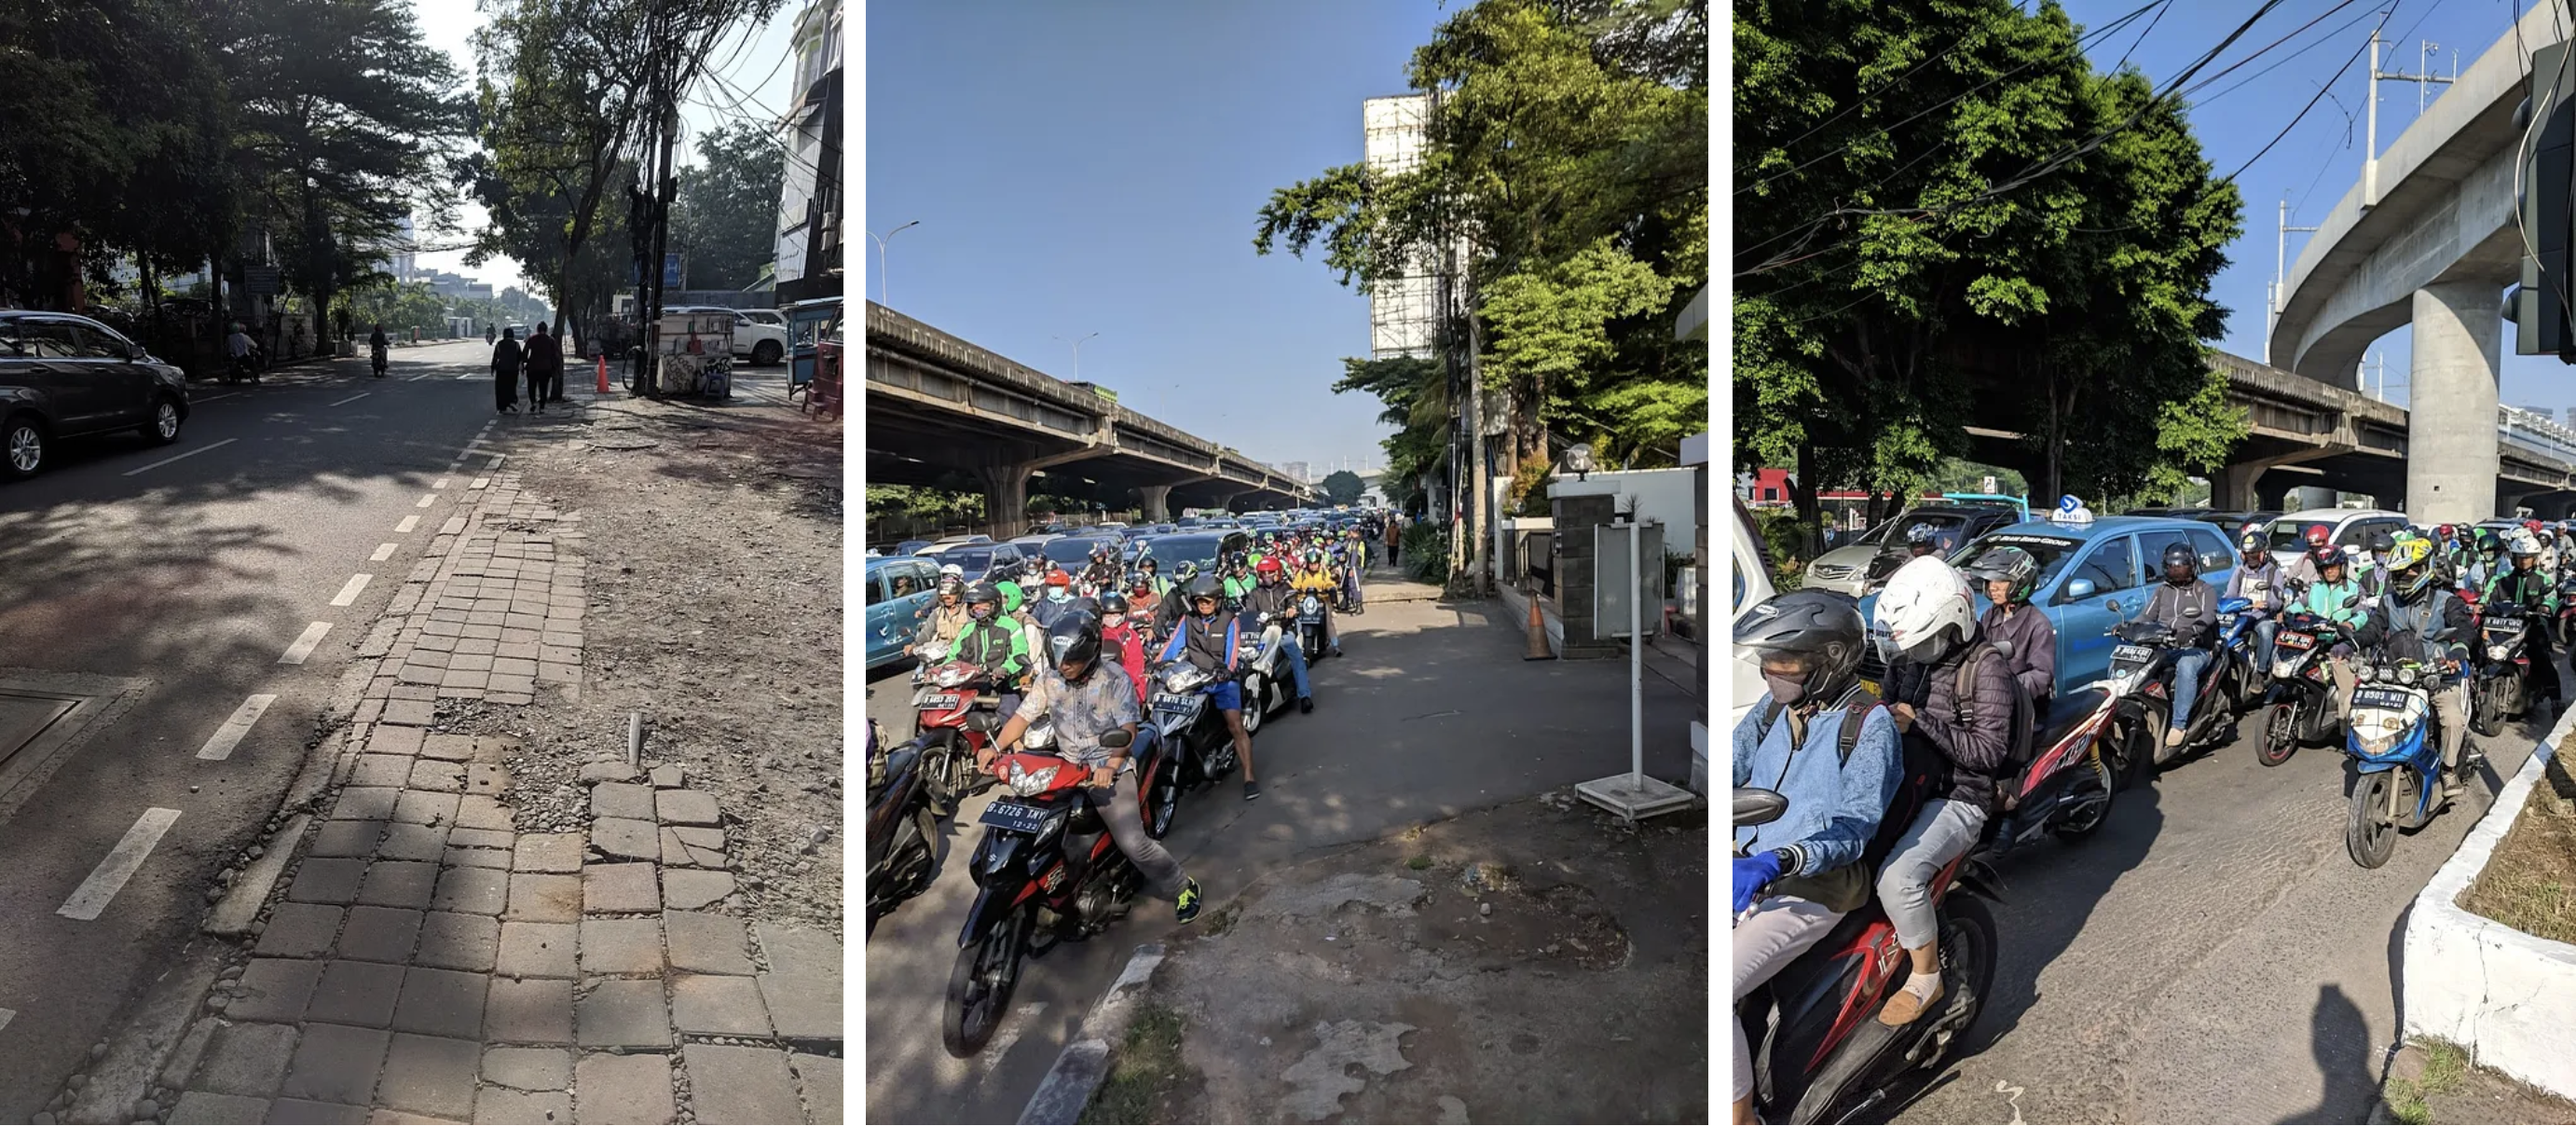 Three images depicting lack of good pedestrian walk; left: broken pavements; middle: crowded with motorcycle; right: no pedestrian walk at all